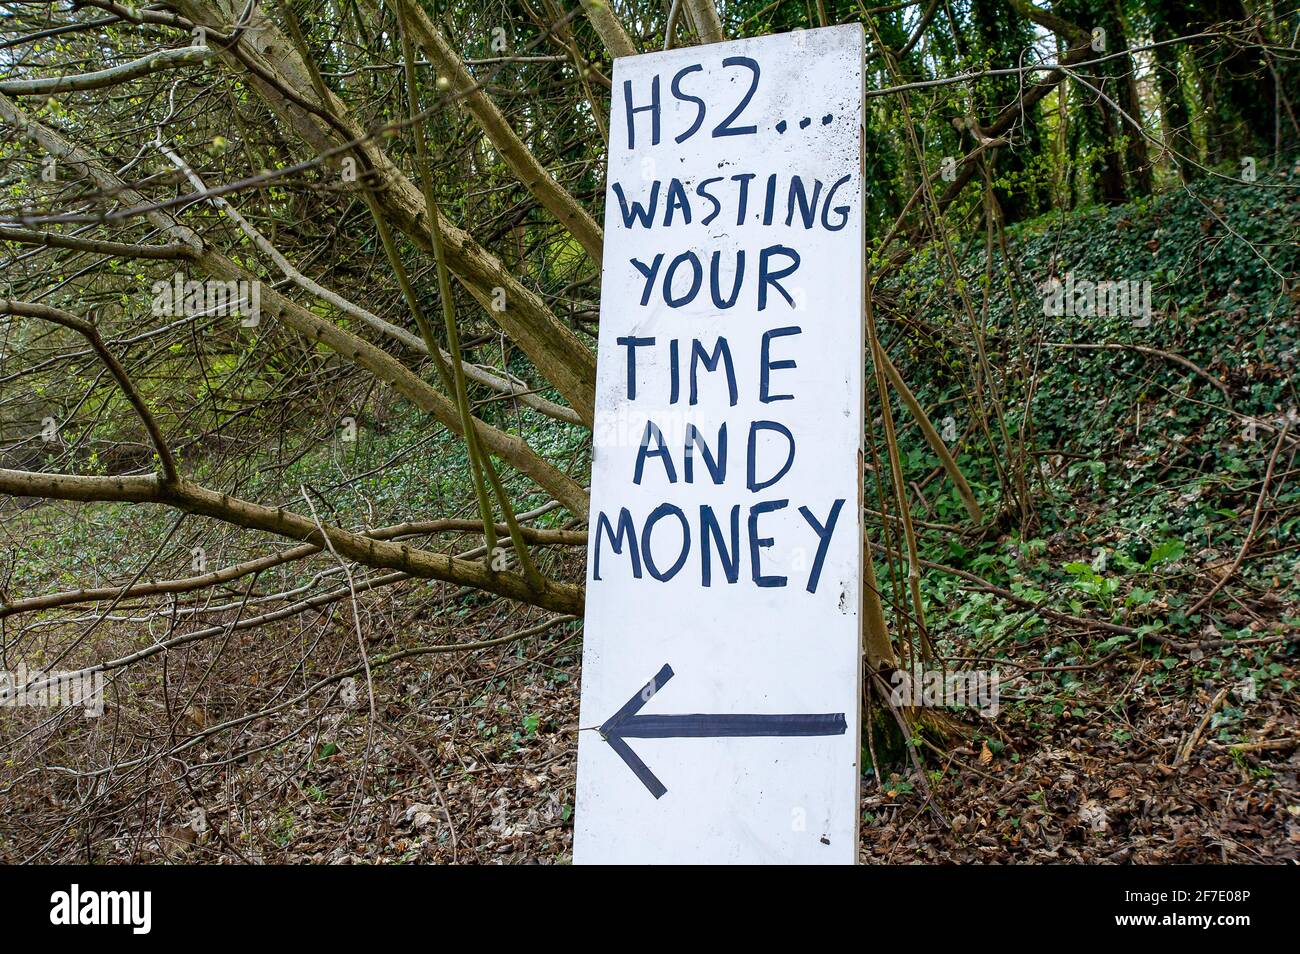 Aylesbury Vale, UK. 6th April, 2021. A sign outside the W.A.R Against HS2 camp. Locals and environmentalists are furious about the devestation HS2 is causing to the Chilterns which is an AONB. The High Speed 2 railway from London to Birmingham is having a huge detrimental impact upon wildlife and the environment. Credit: Maureen McLean/Alamy Stock Photo